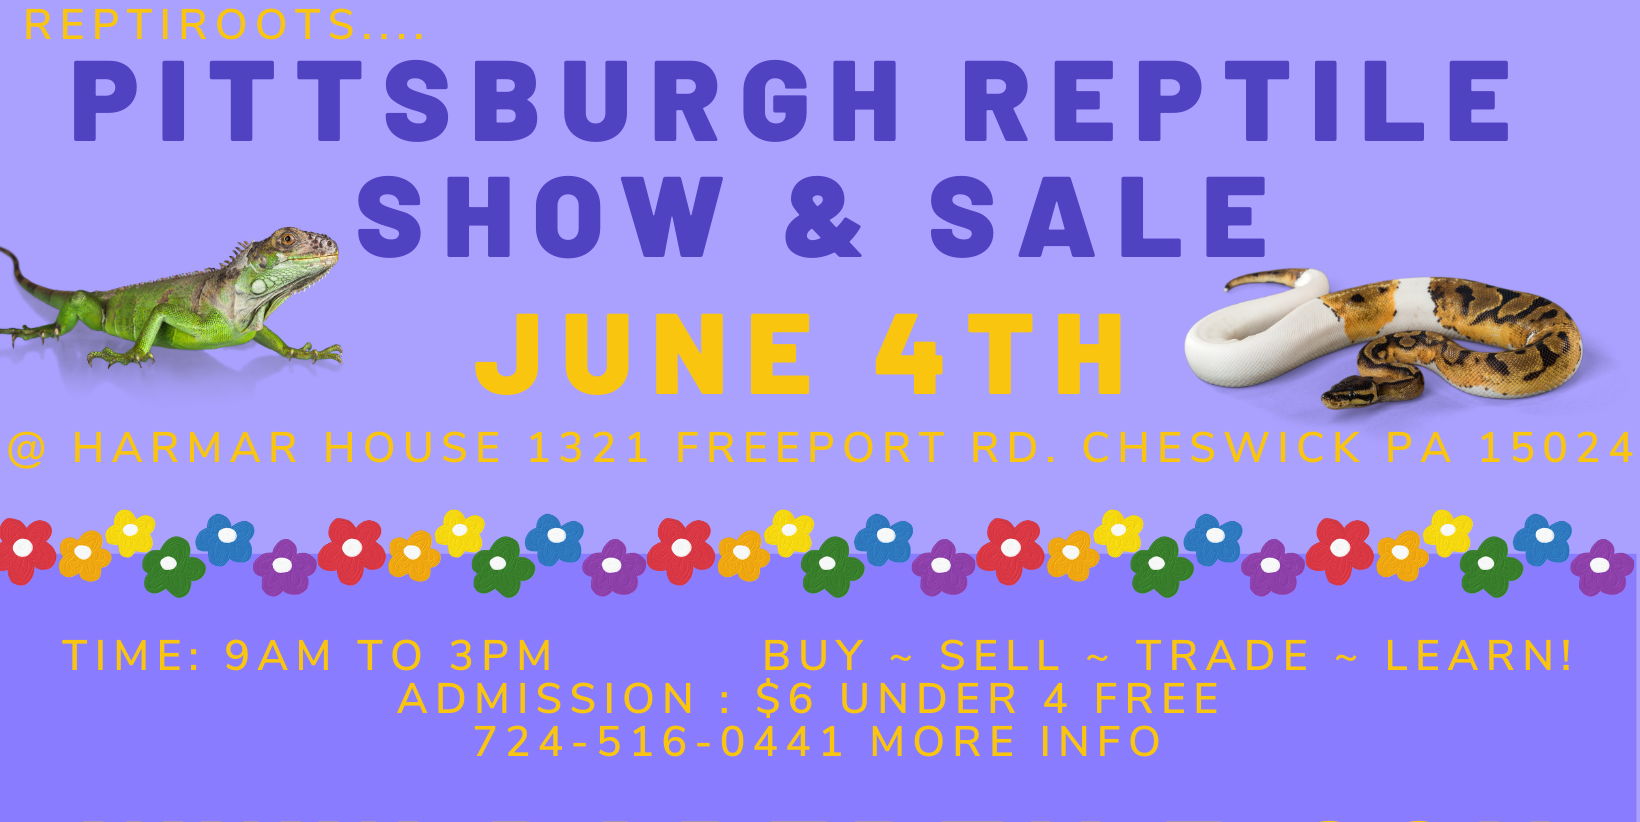 Pittsburgh Reptile Show & Sale June 4th 2023 promotional image